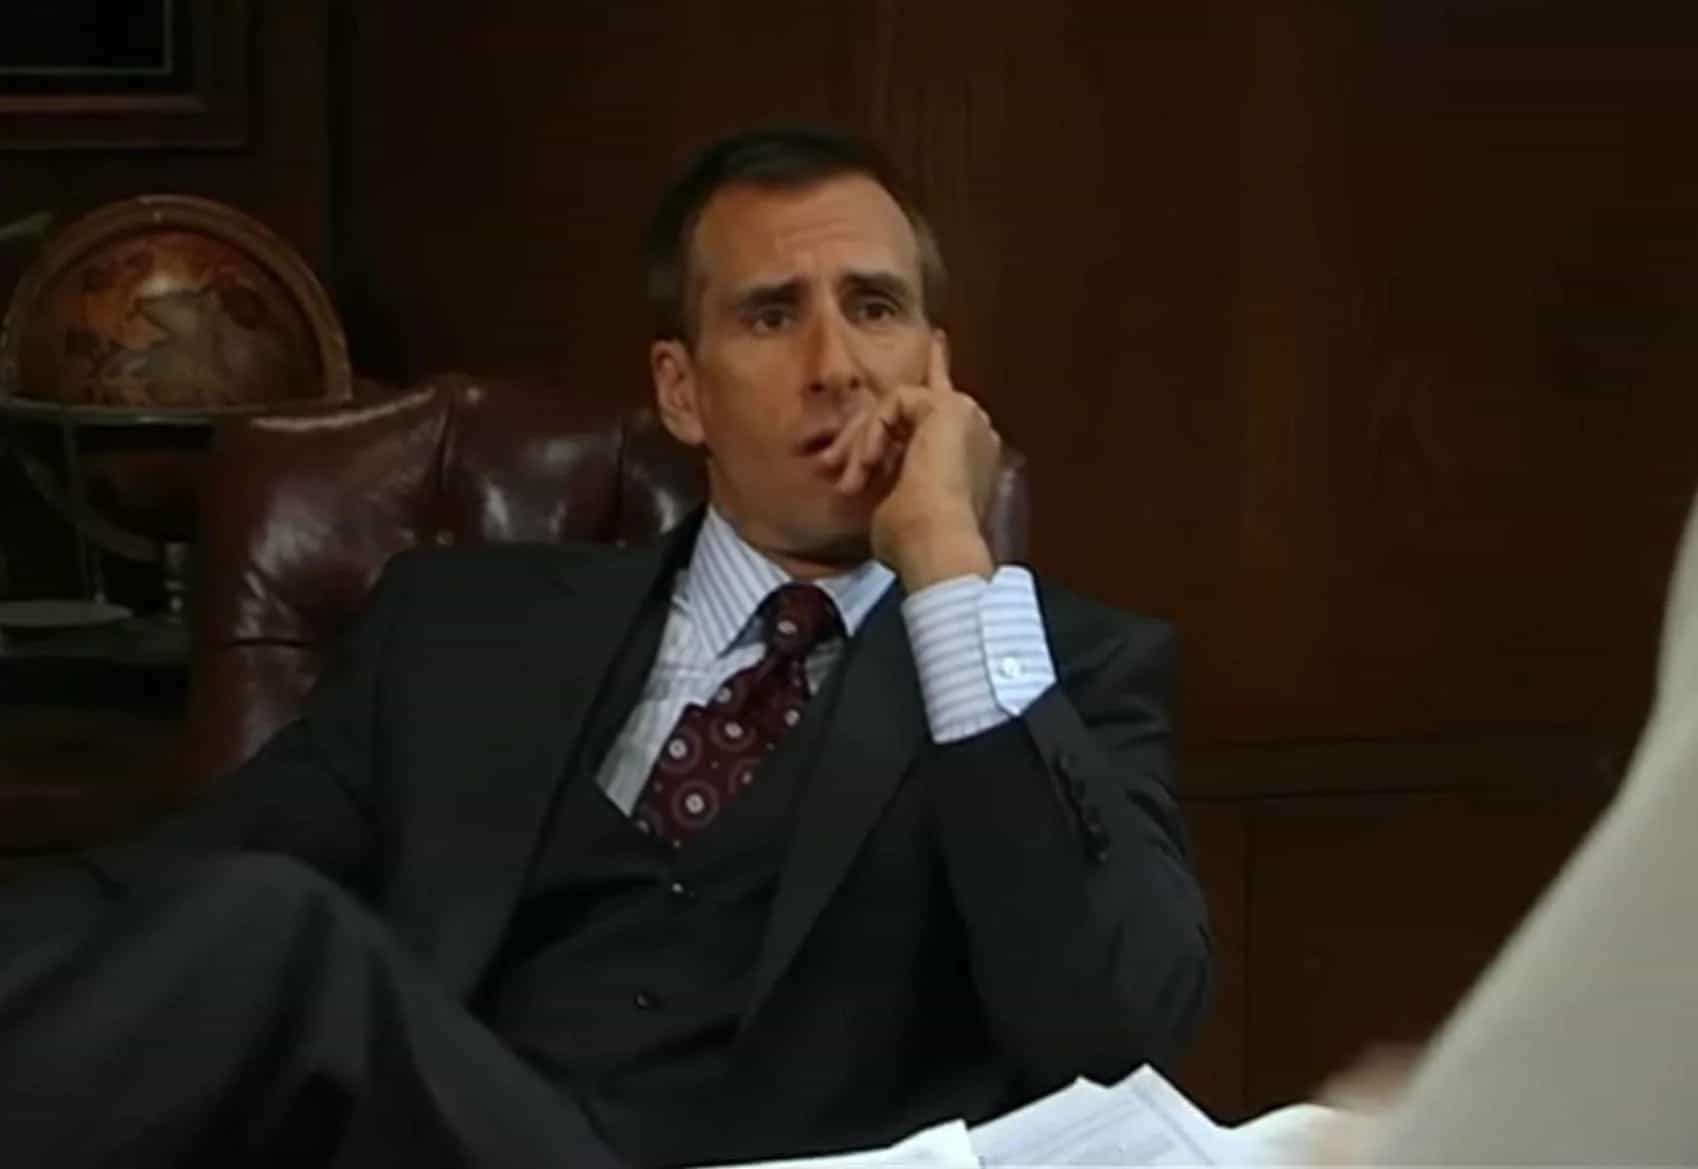 Brian Unger in this image from 3 Arts Entertainment